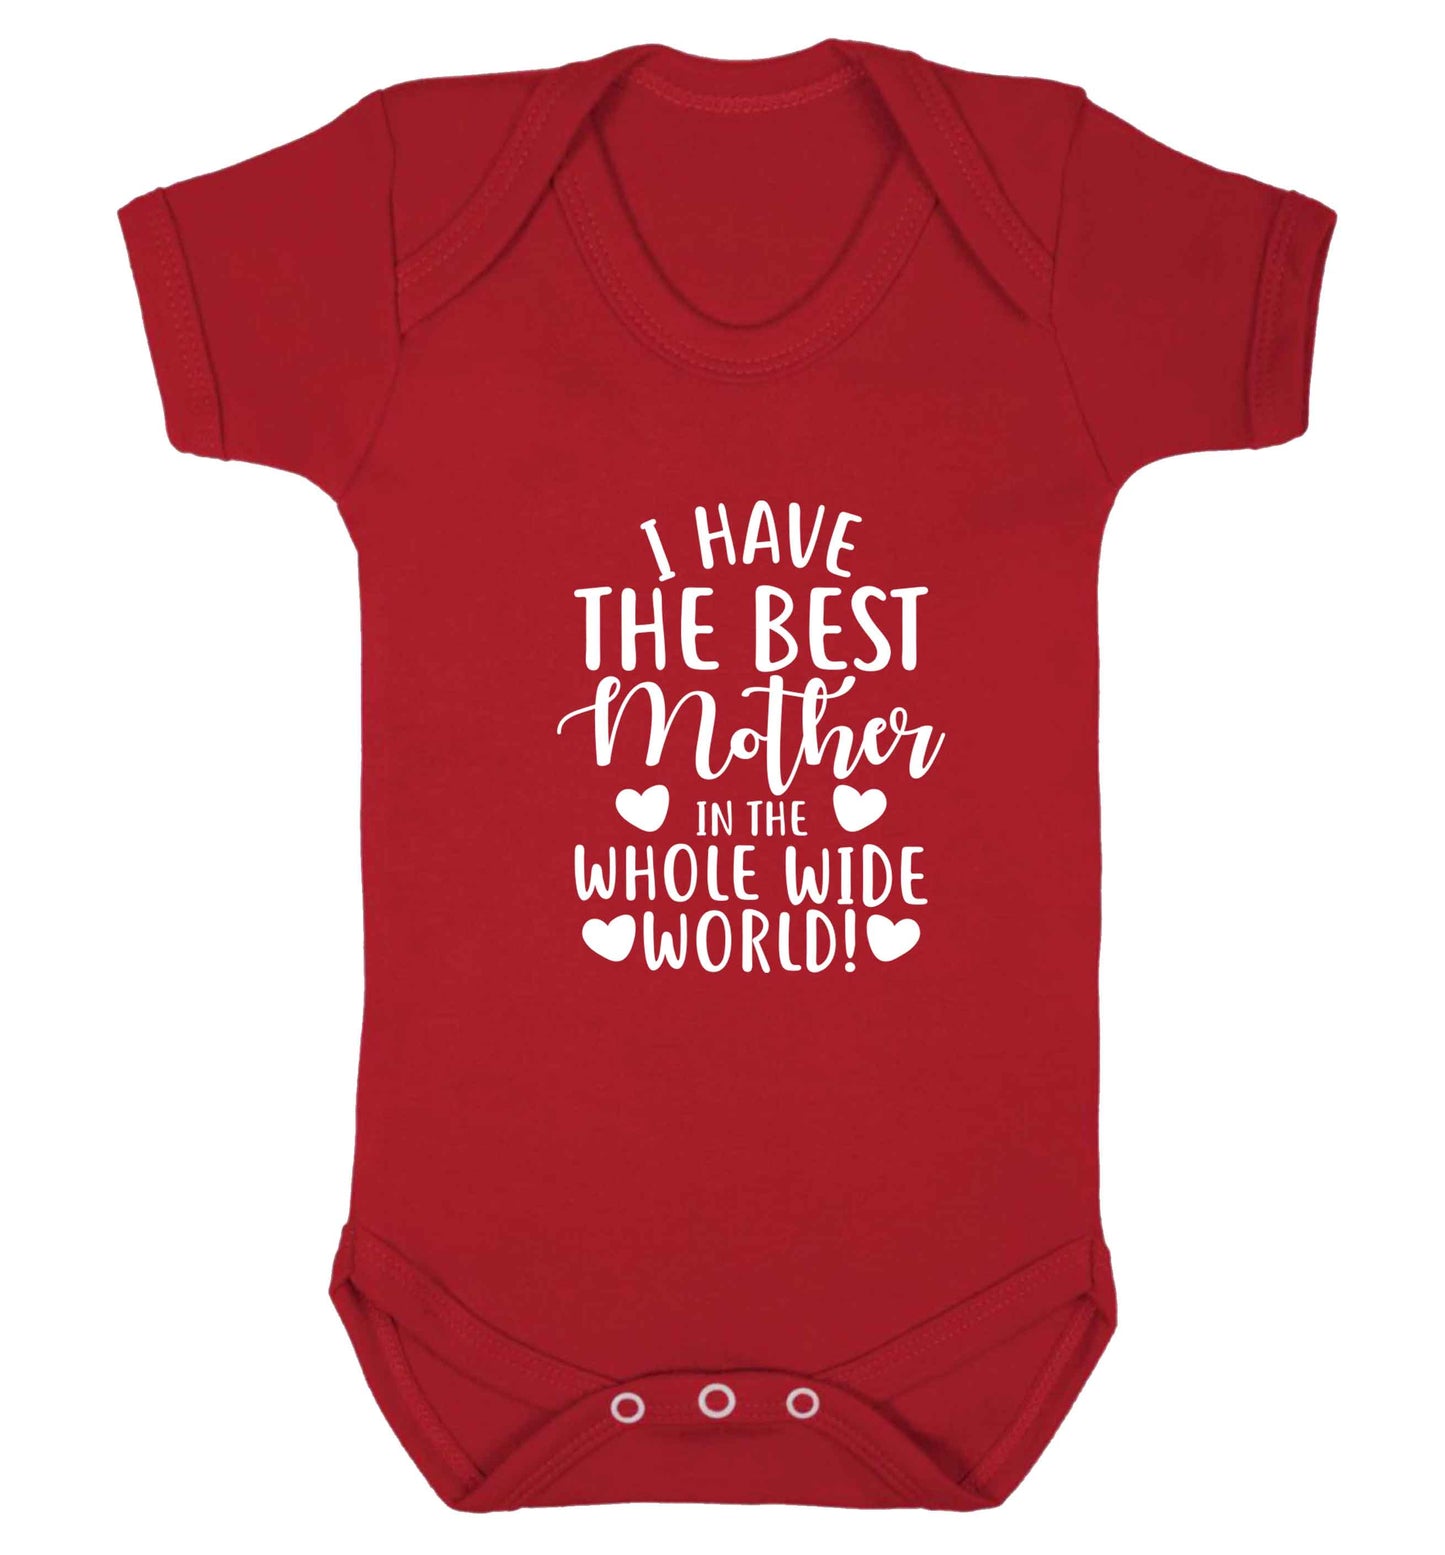 I have the best mother in the whole wide world baby vest red 18-24 months